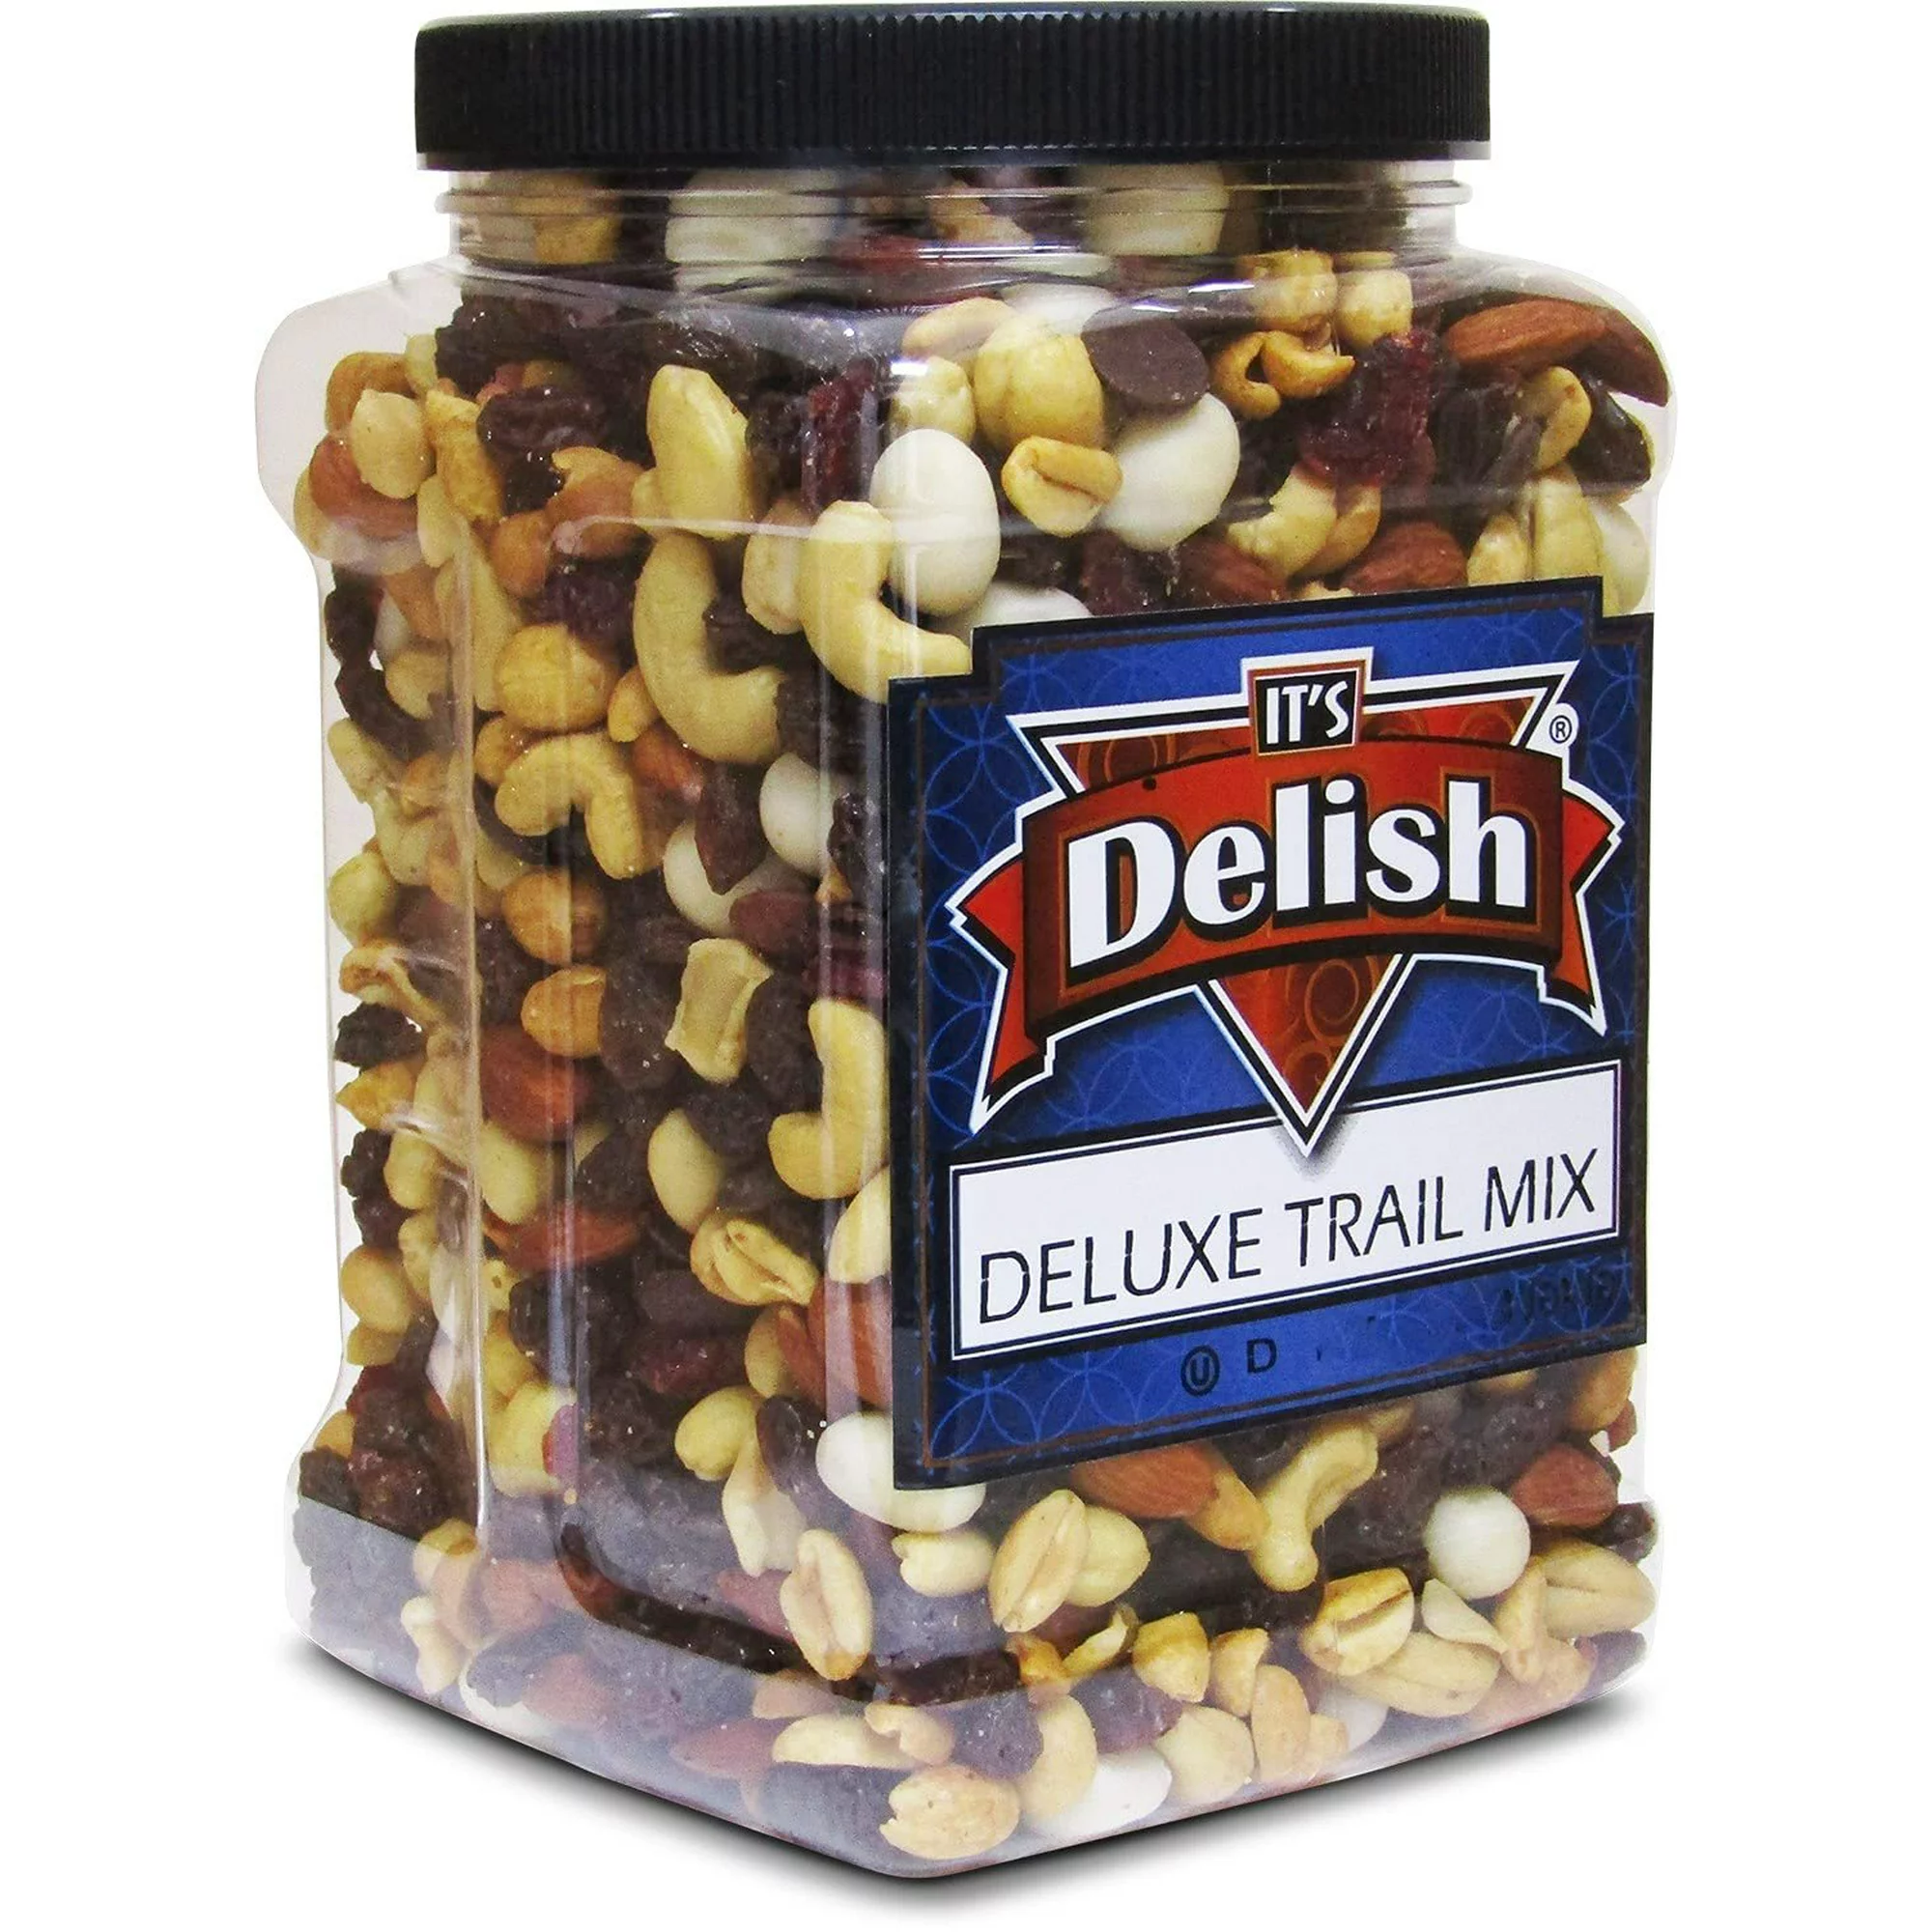 Honey Roasted Mixed Nuts by It's Delish, 2.5 LBS Reusable Jumbo Container